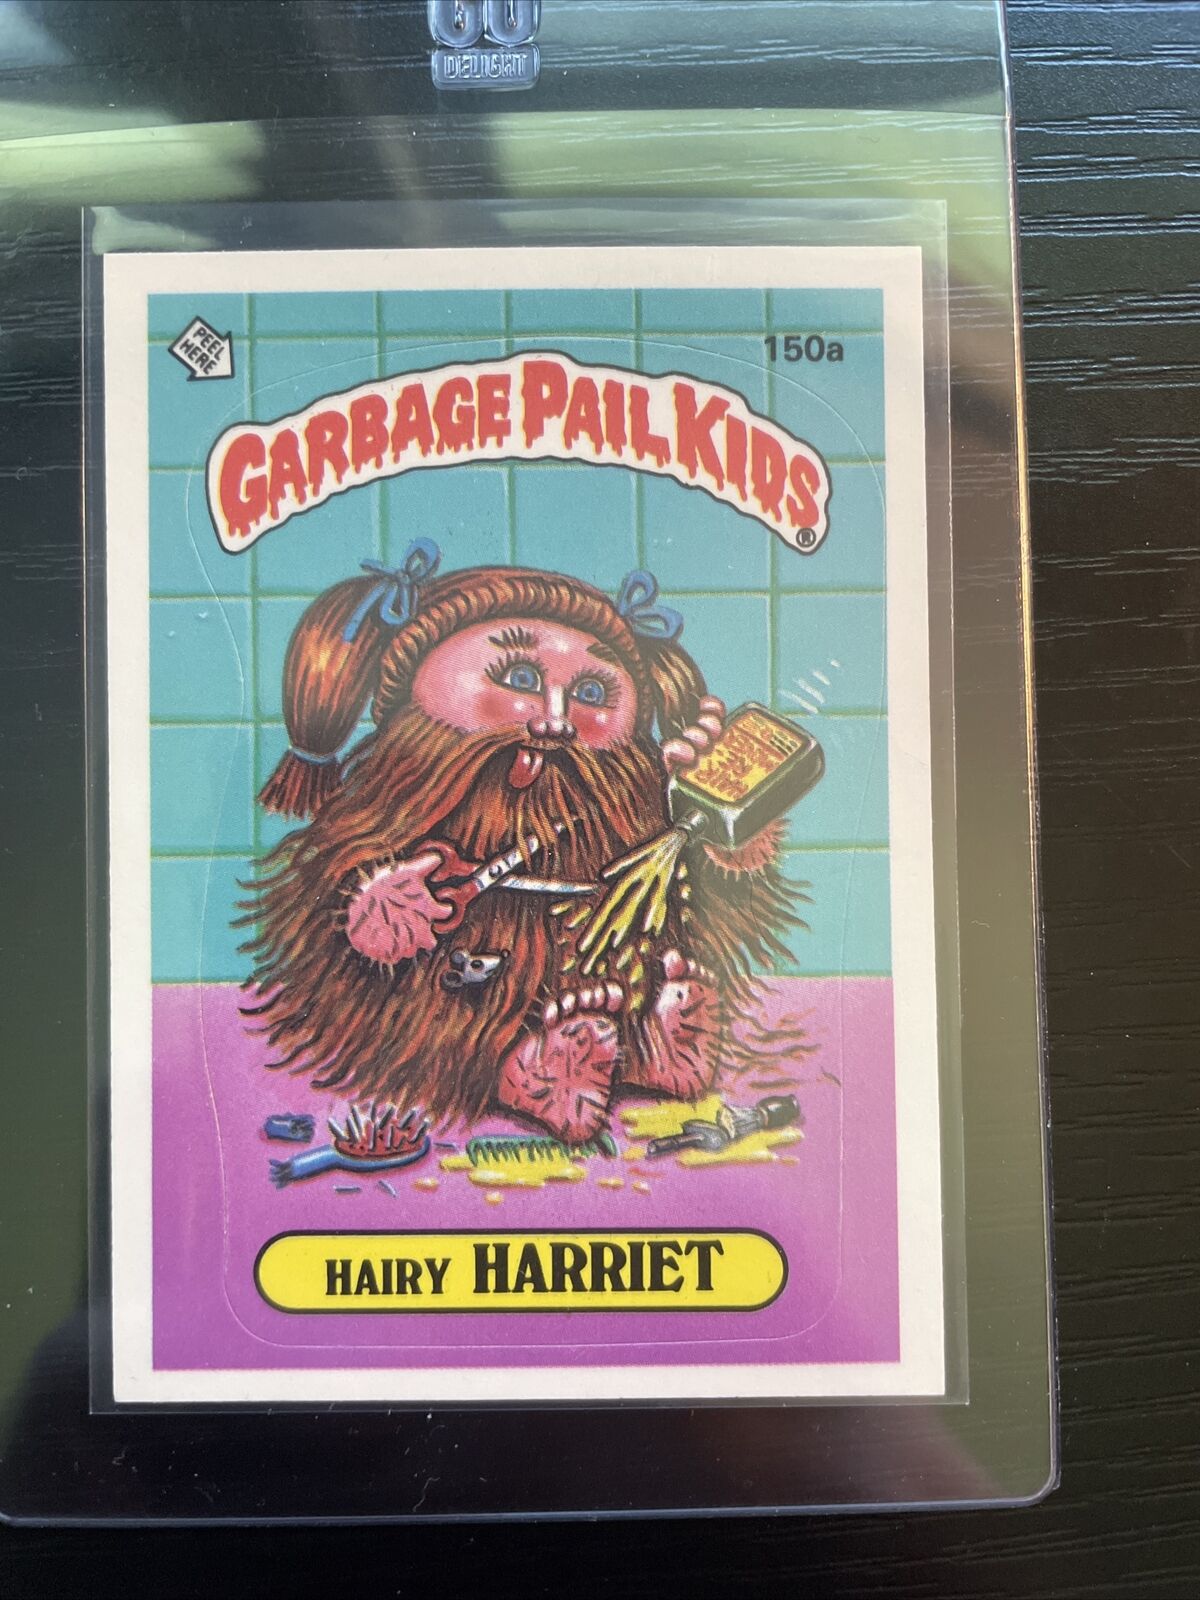 1986 Topps - Garbage Pail Kids - Hairy Harriet - Series 4 - Stickers - #150a